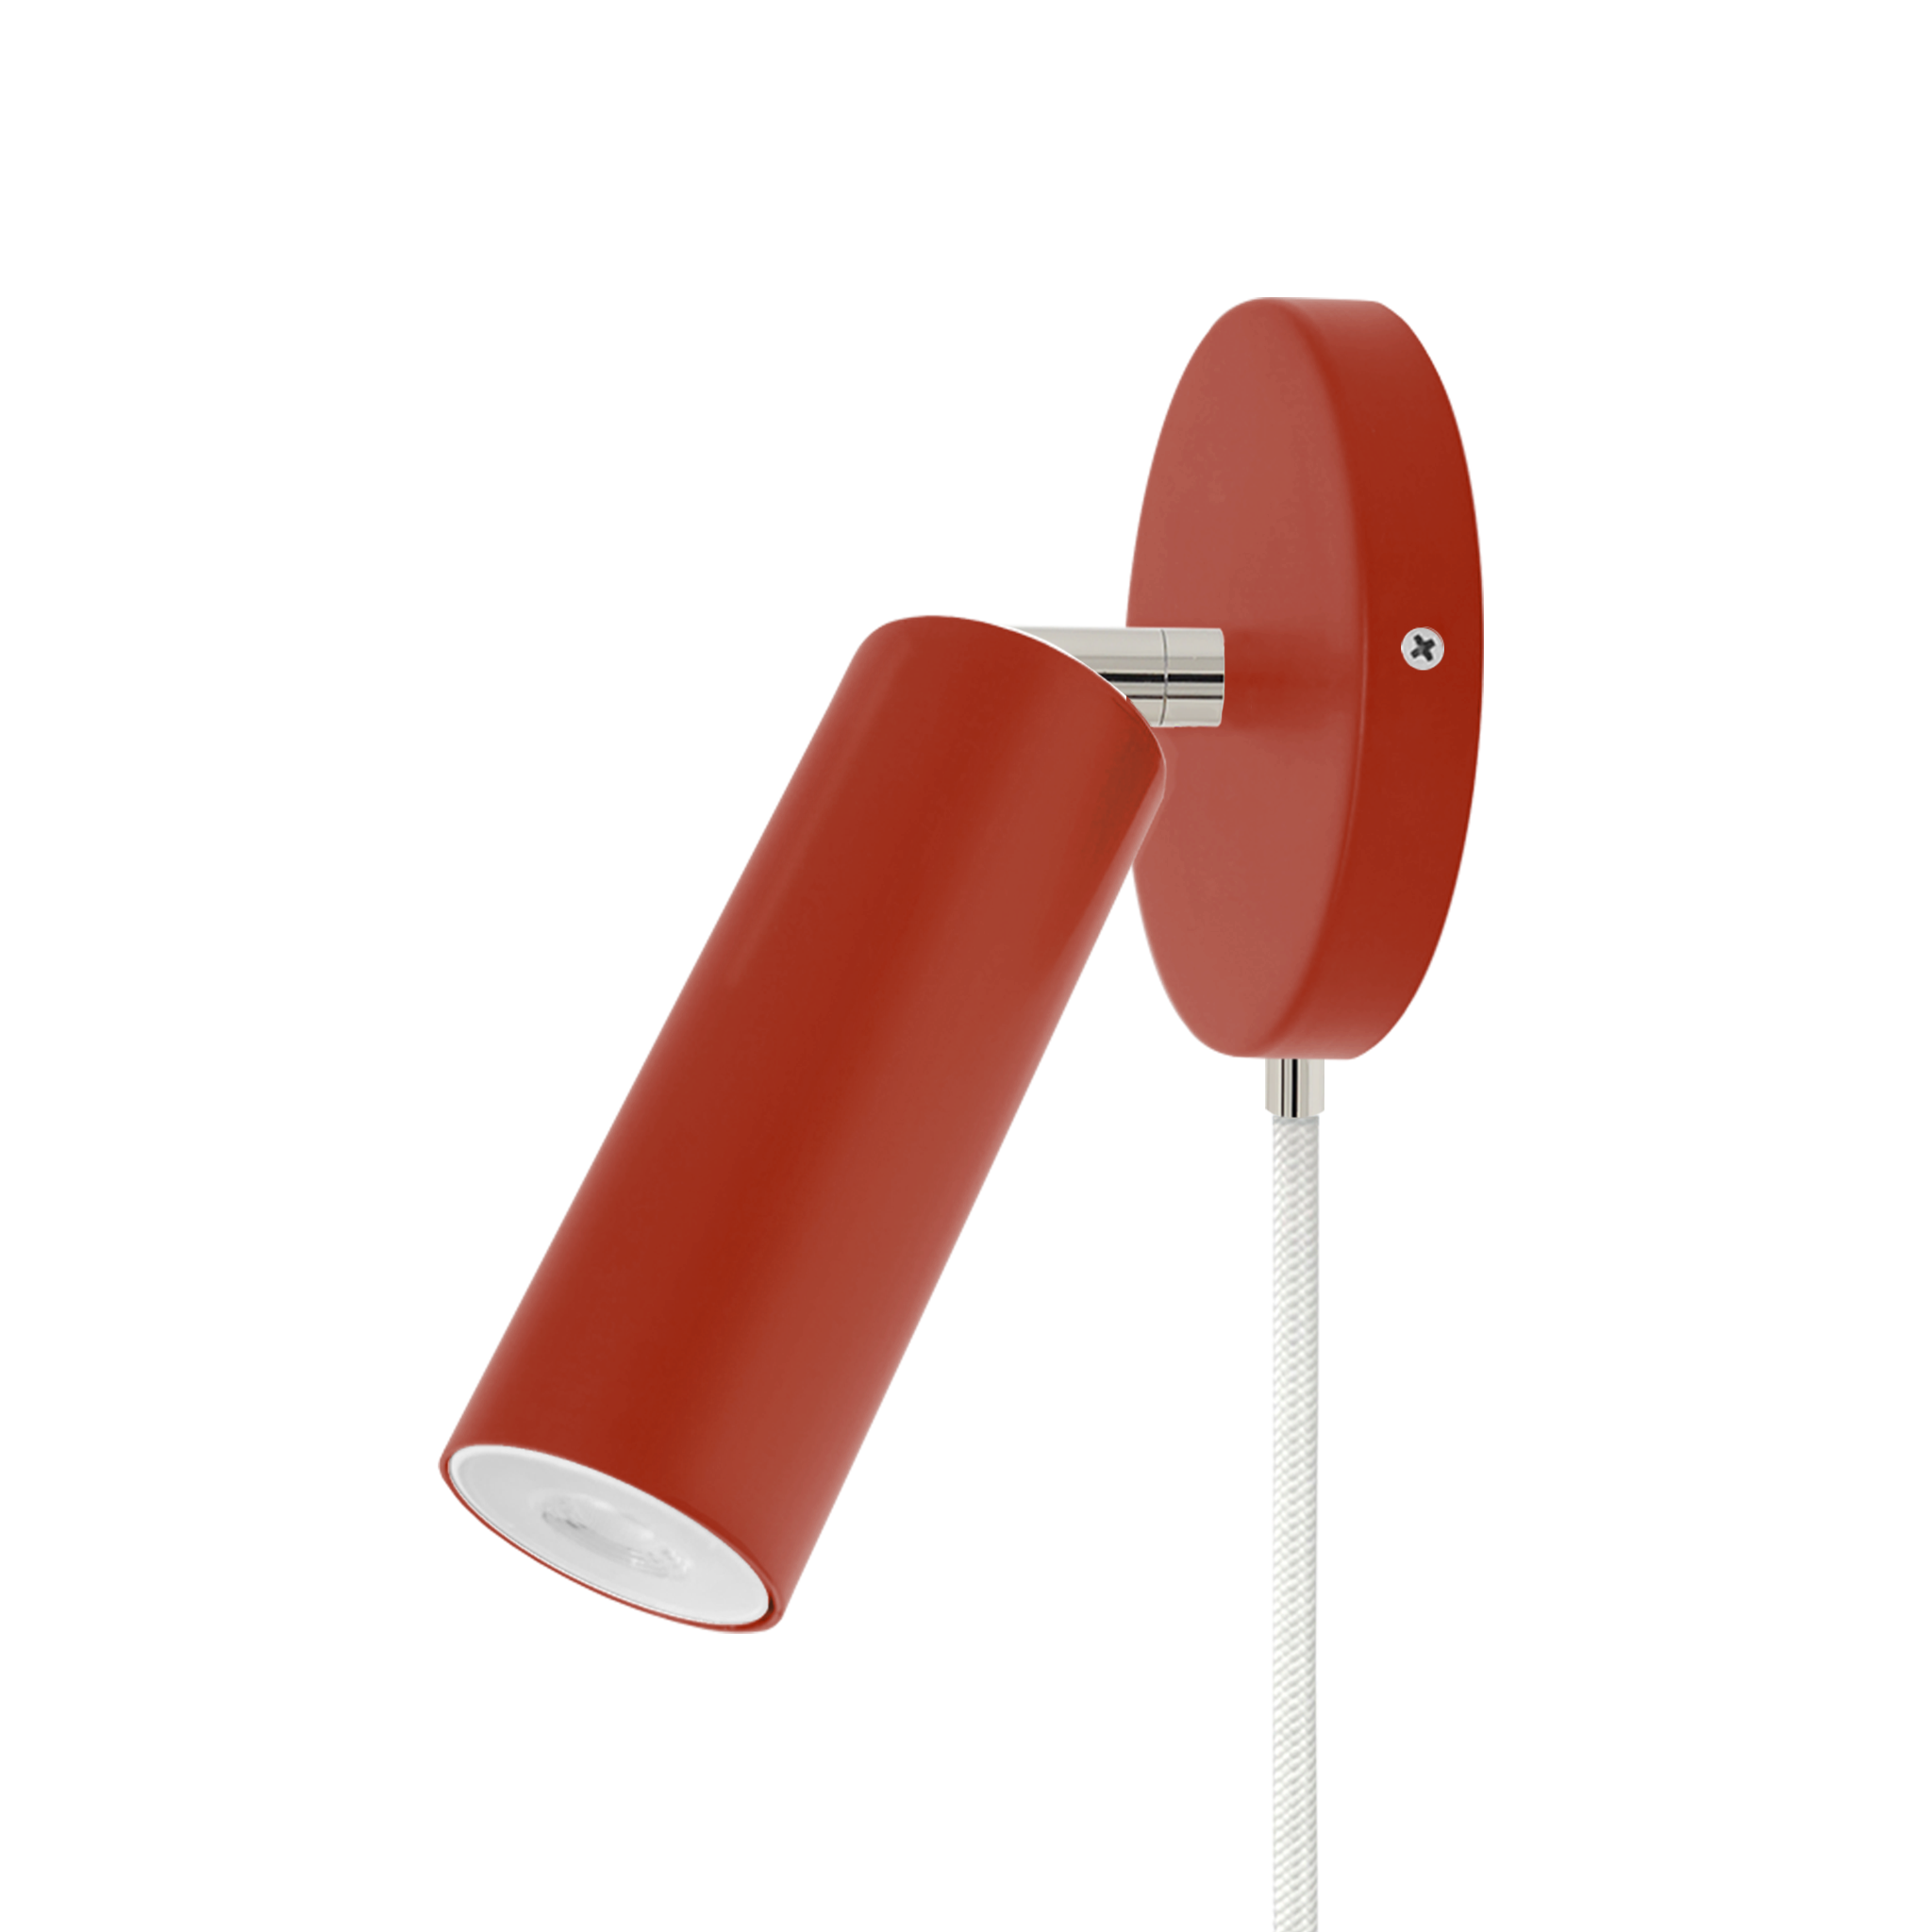 Nickel and riding hood red color Reader plug-in sconce no arm Dutton Brown lighting